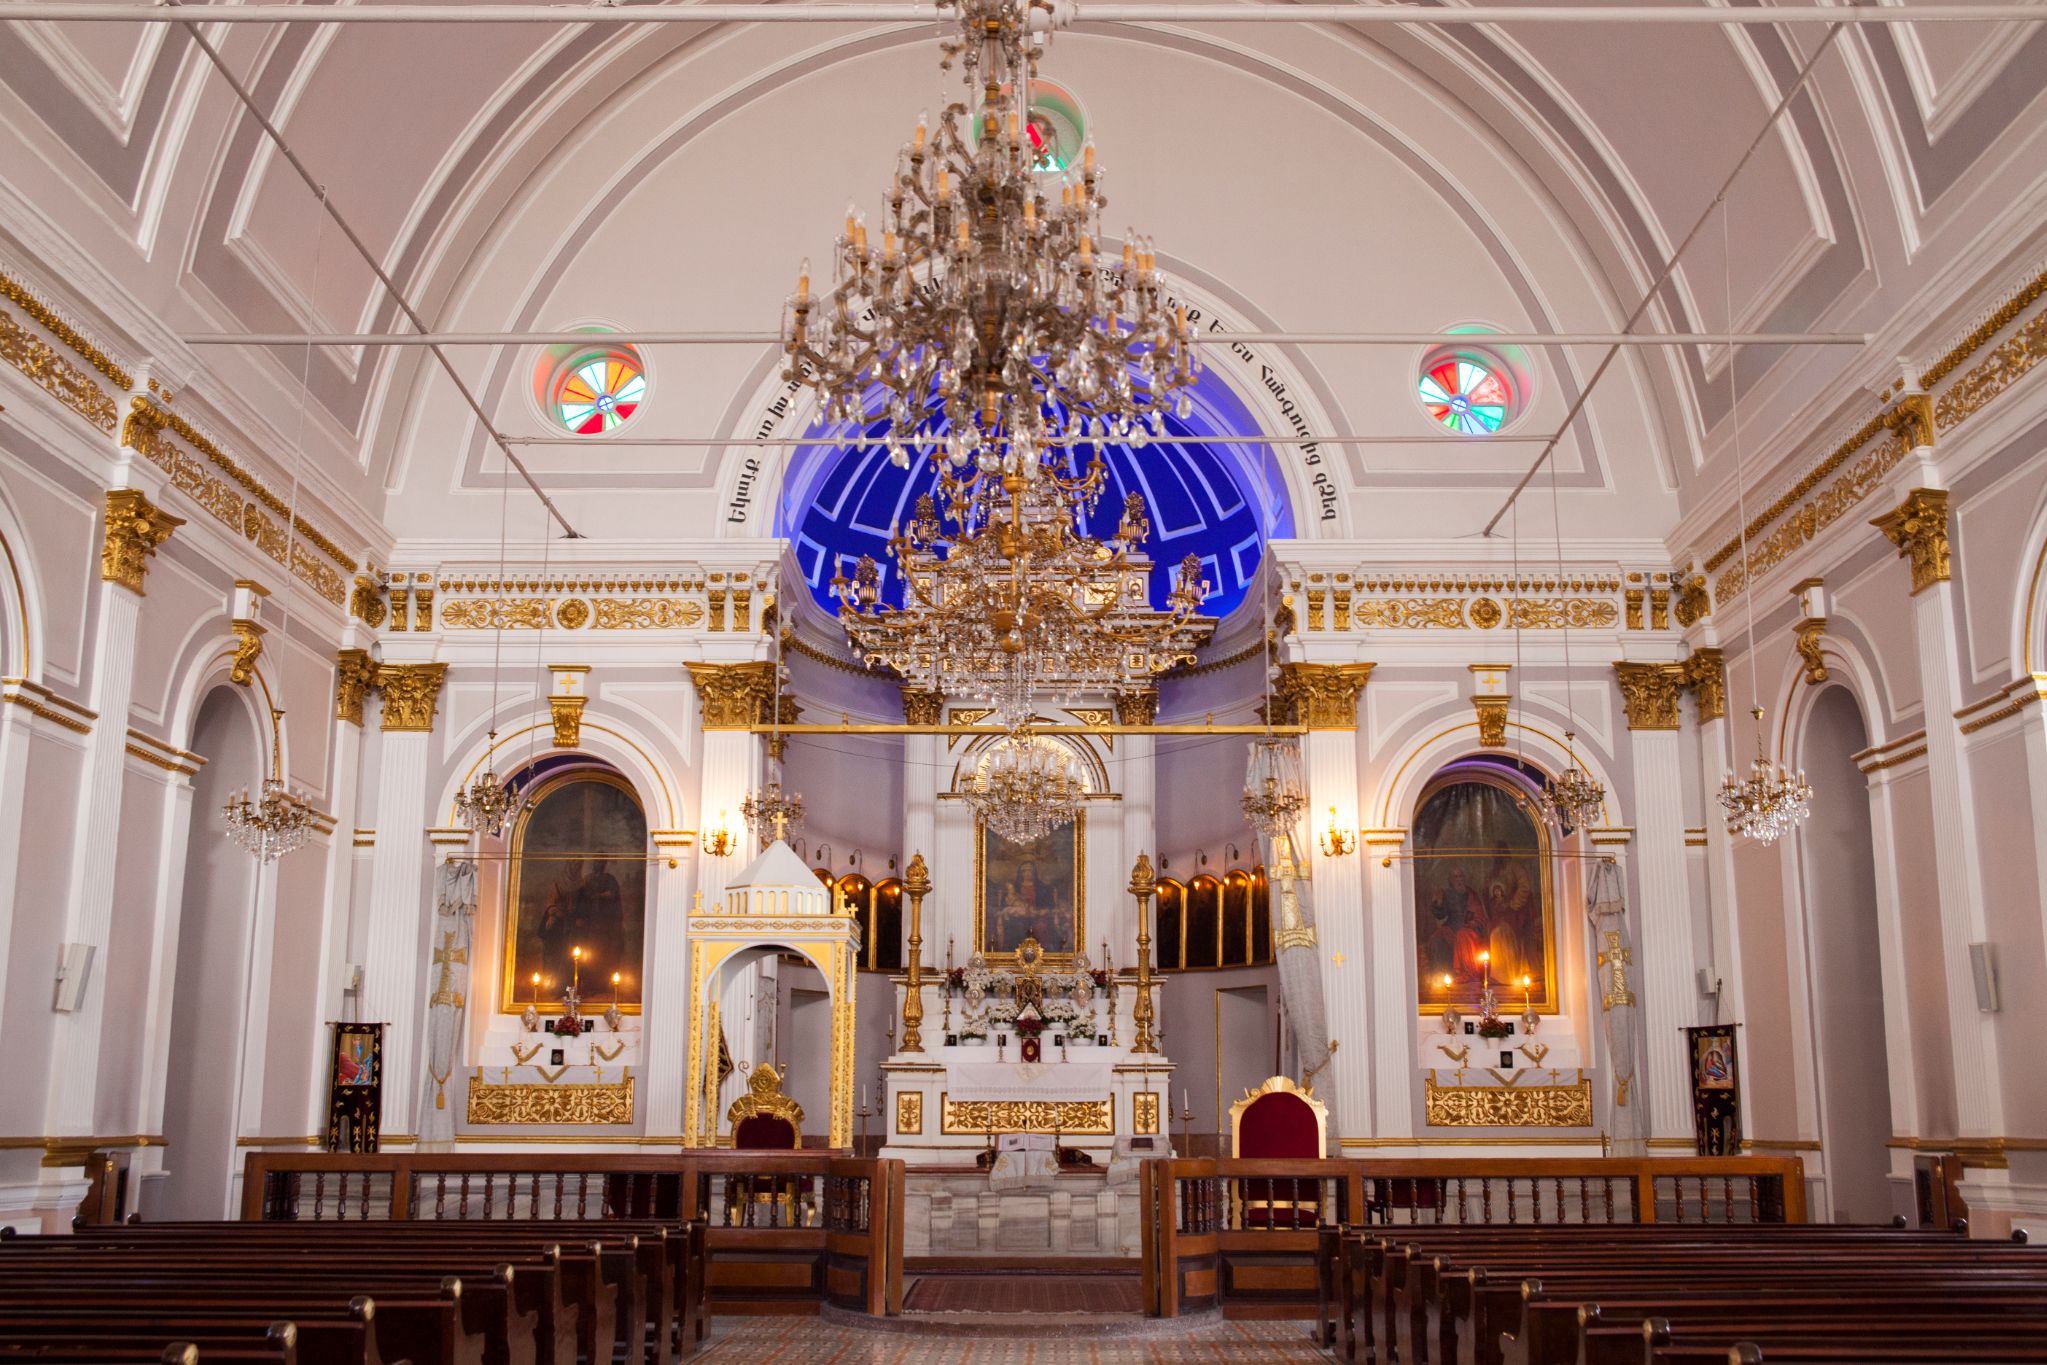 The place of worship was originally built as a Greek Orthodox Church in the 11th century